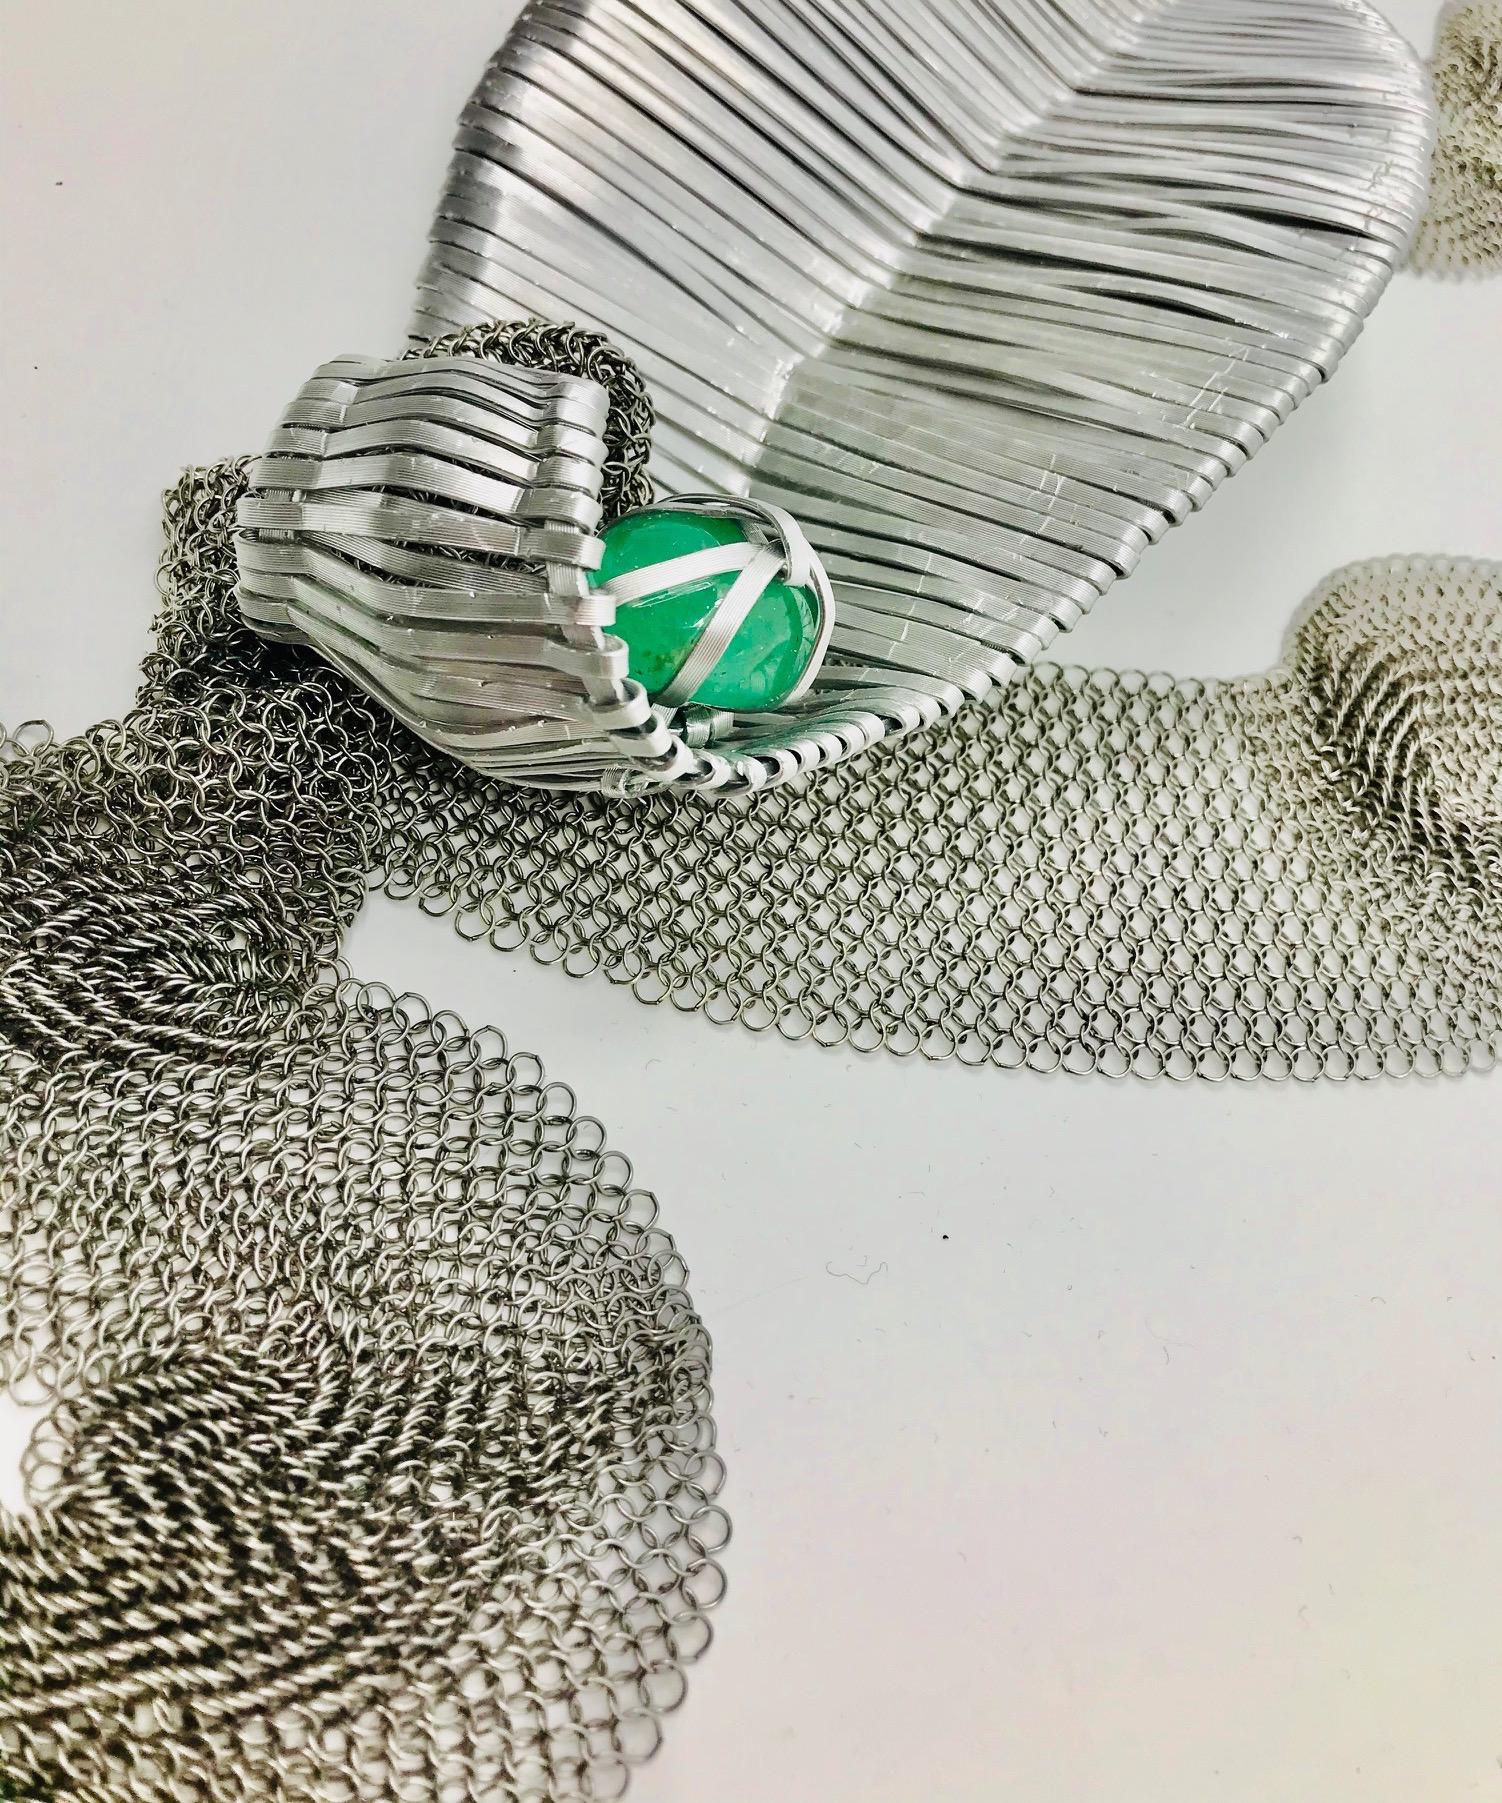 Contemporary Sylvia Gottwald, Emerald Pendant on Stainless Steel mesh. For Sale